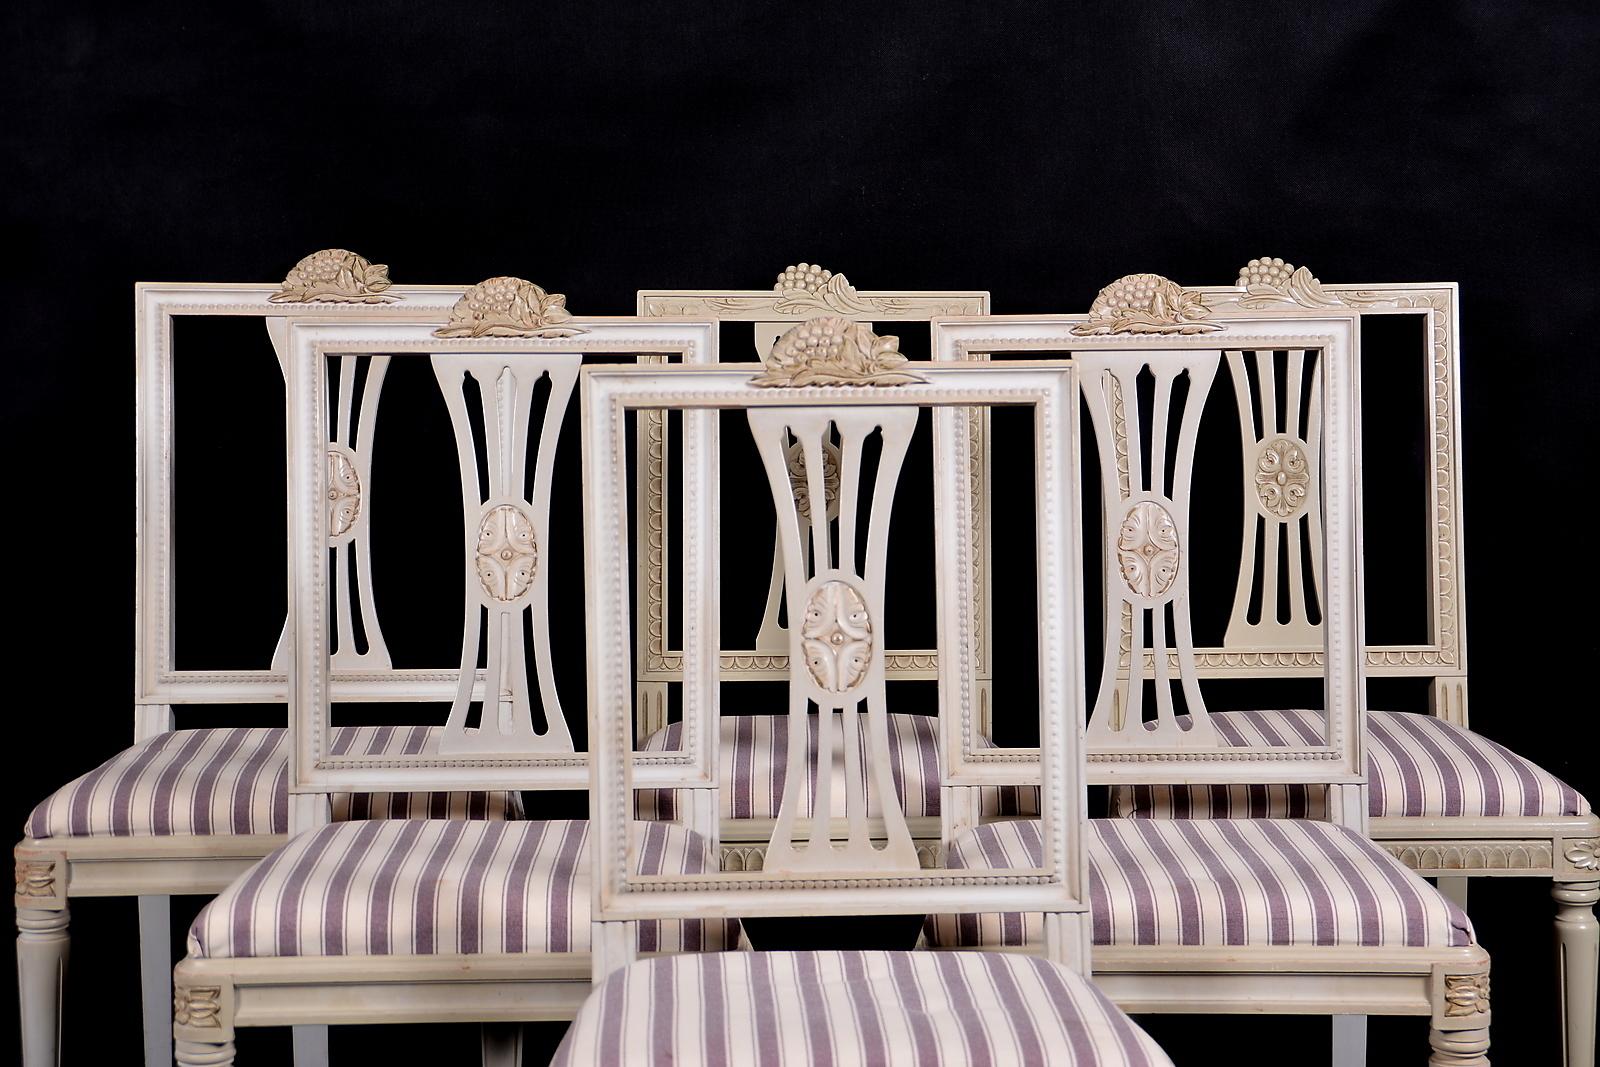 Unusual set of 6 Gustavian lindome dining chairs in good structural condition with fine carved detailing in Grey with trap seats. Lovely fluted legs and Classic rose detail on the edging. These chairs don't appear very often and are always in demand